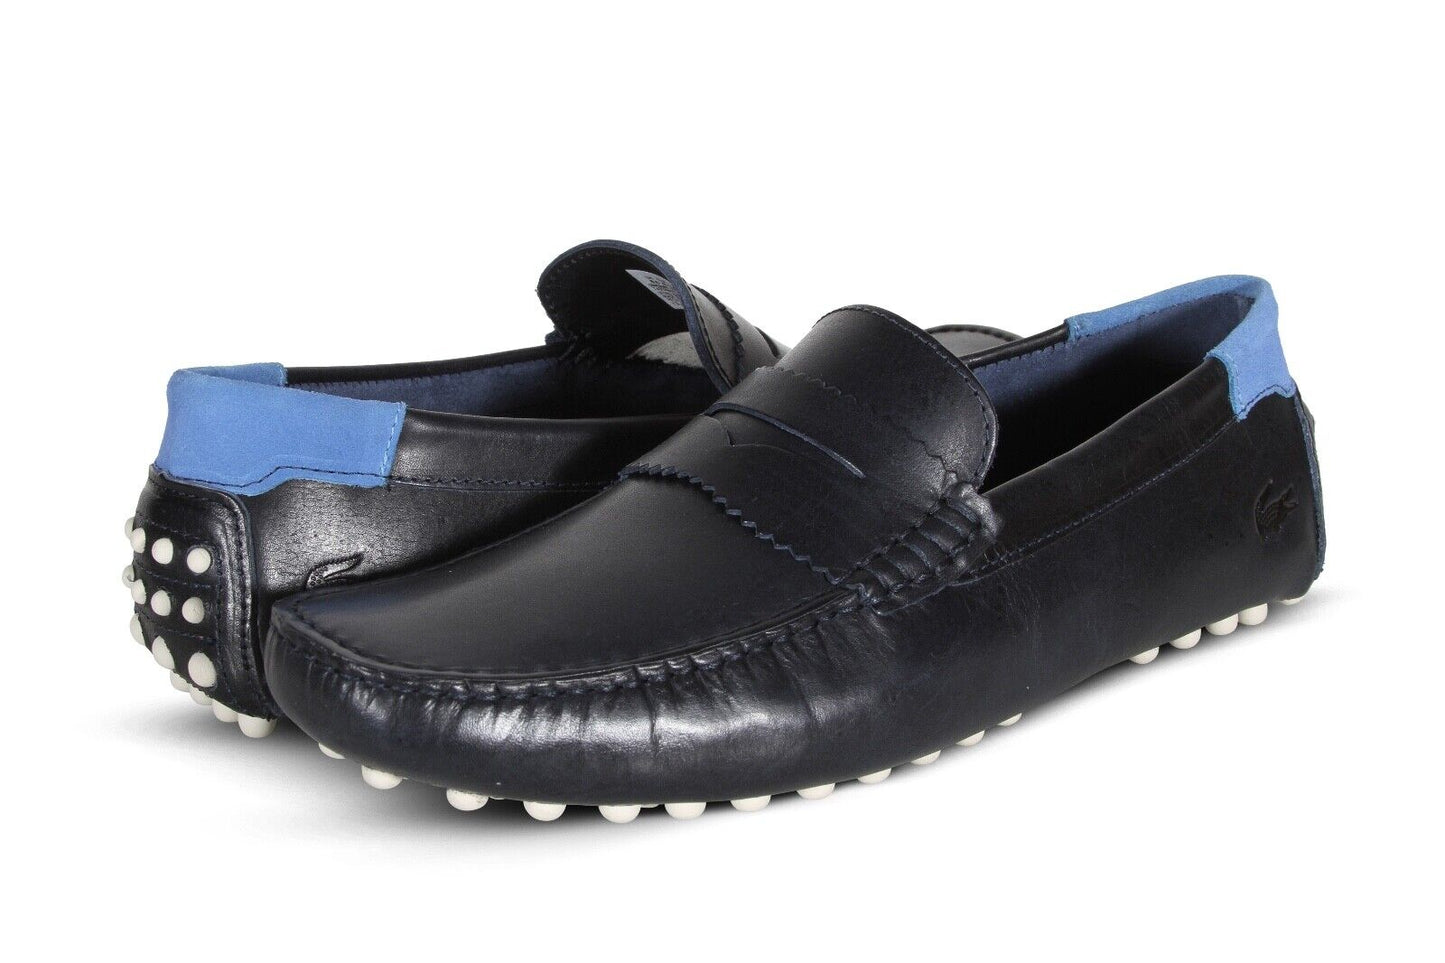 Lacoste Concours 123 1 CMA Men’s Leather Loafers in Navy Blue 745CMA0032J18